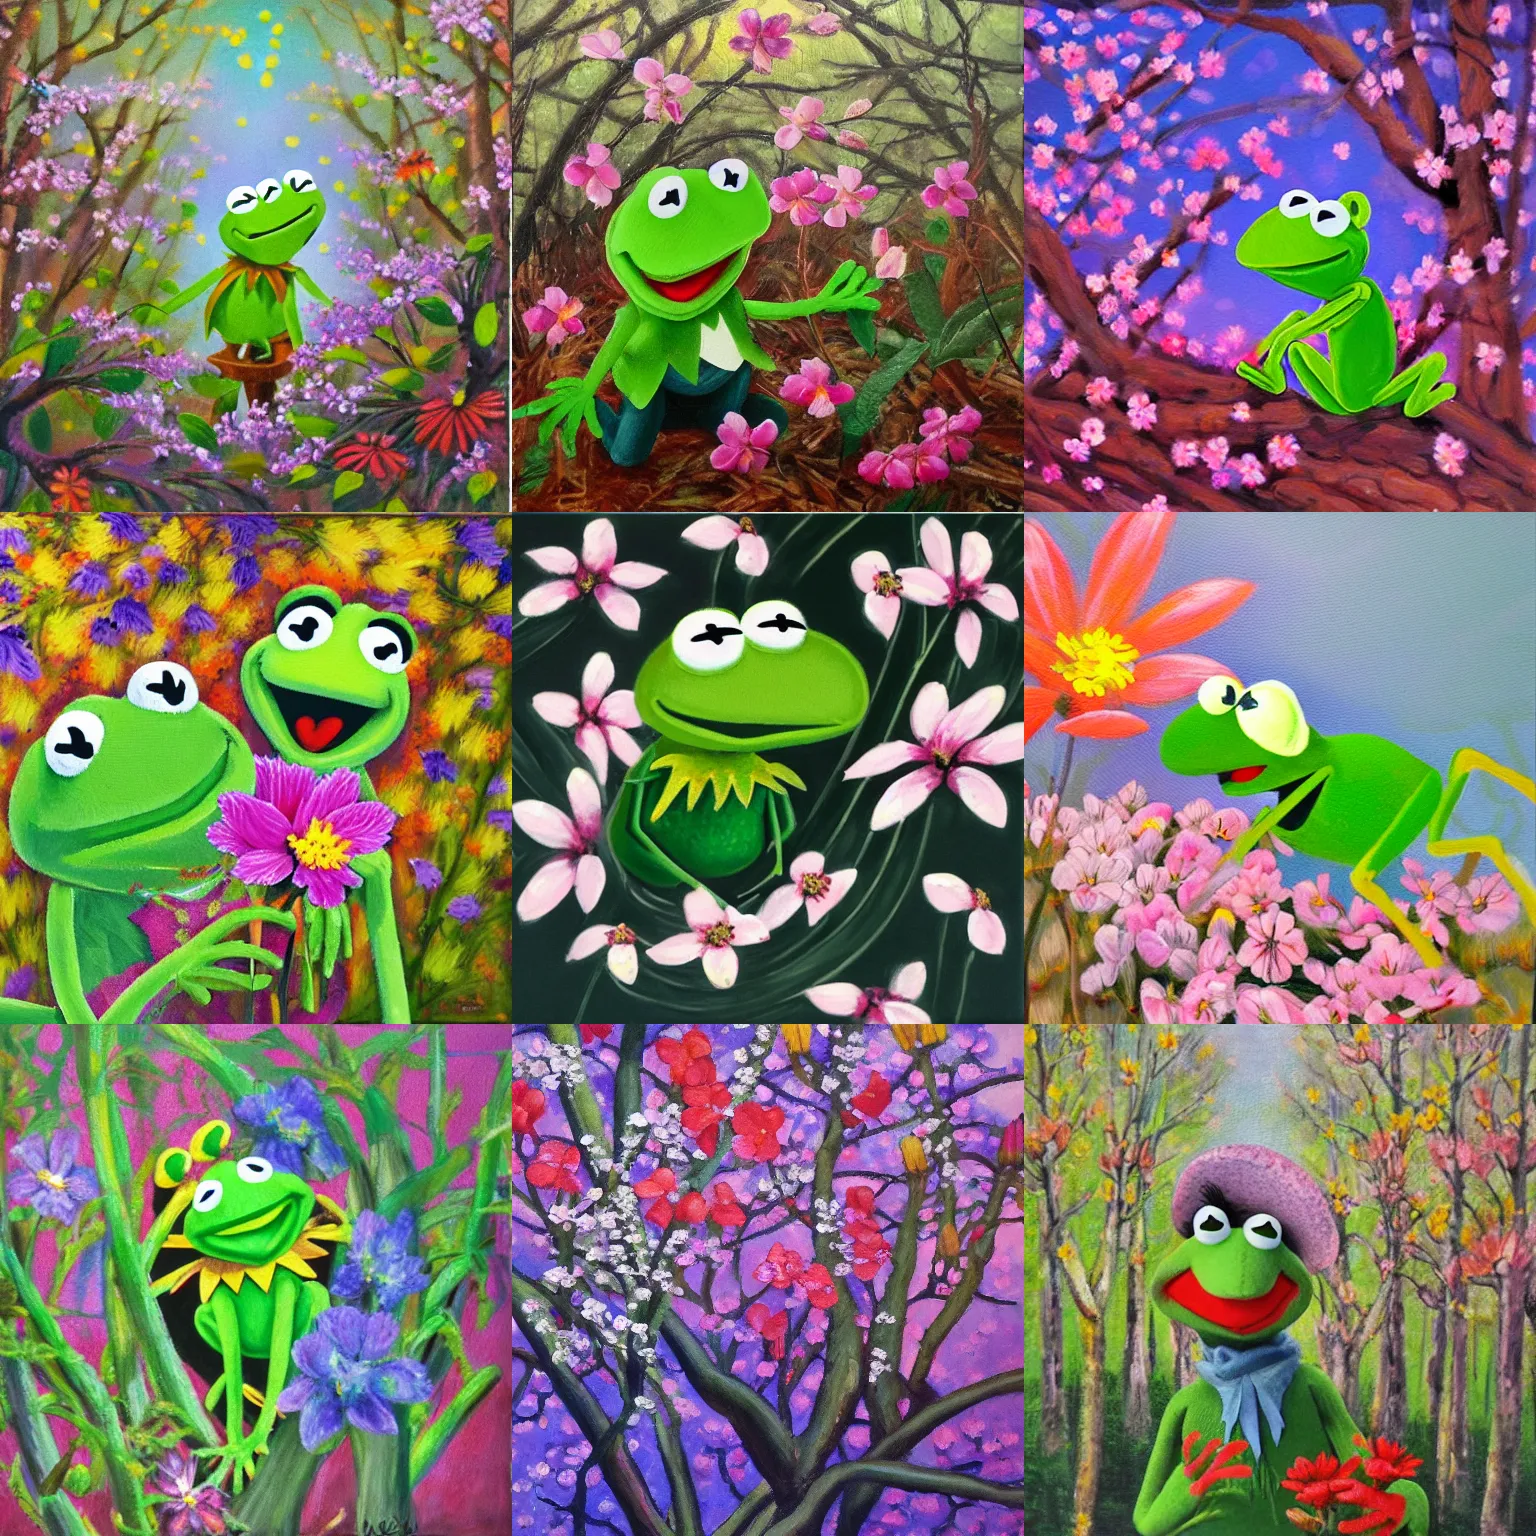 Prompt: The first day of spring. The woods are in bloom, and Kermit the Frog has found some flowers. Oil painting by Natsuki Arayama